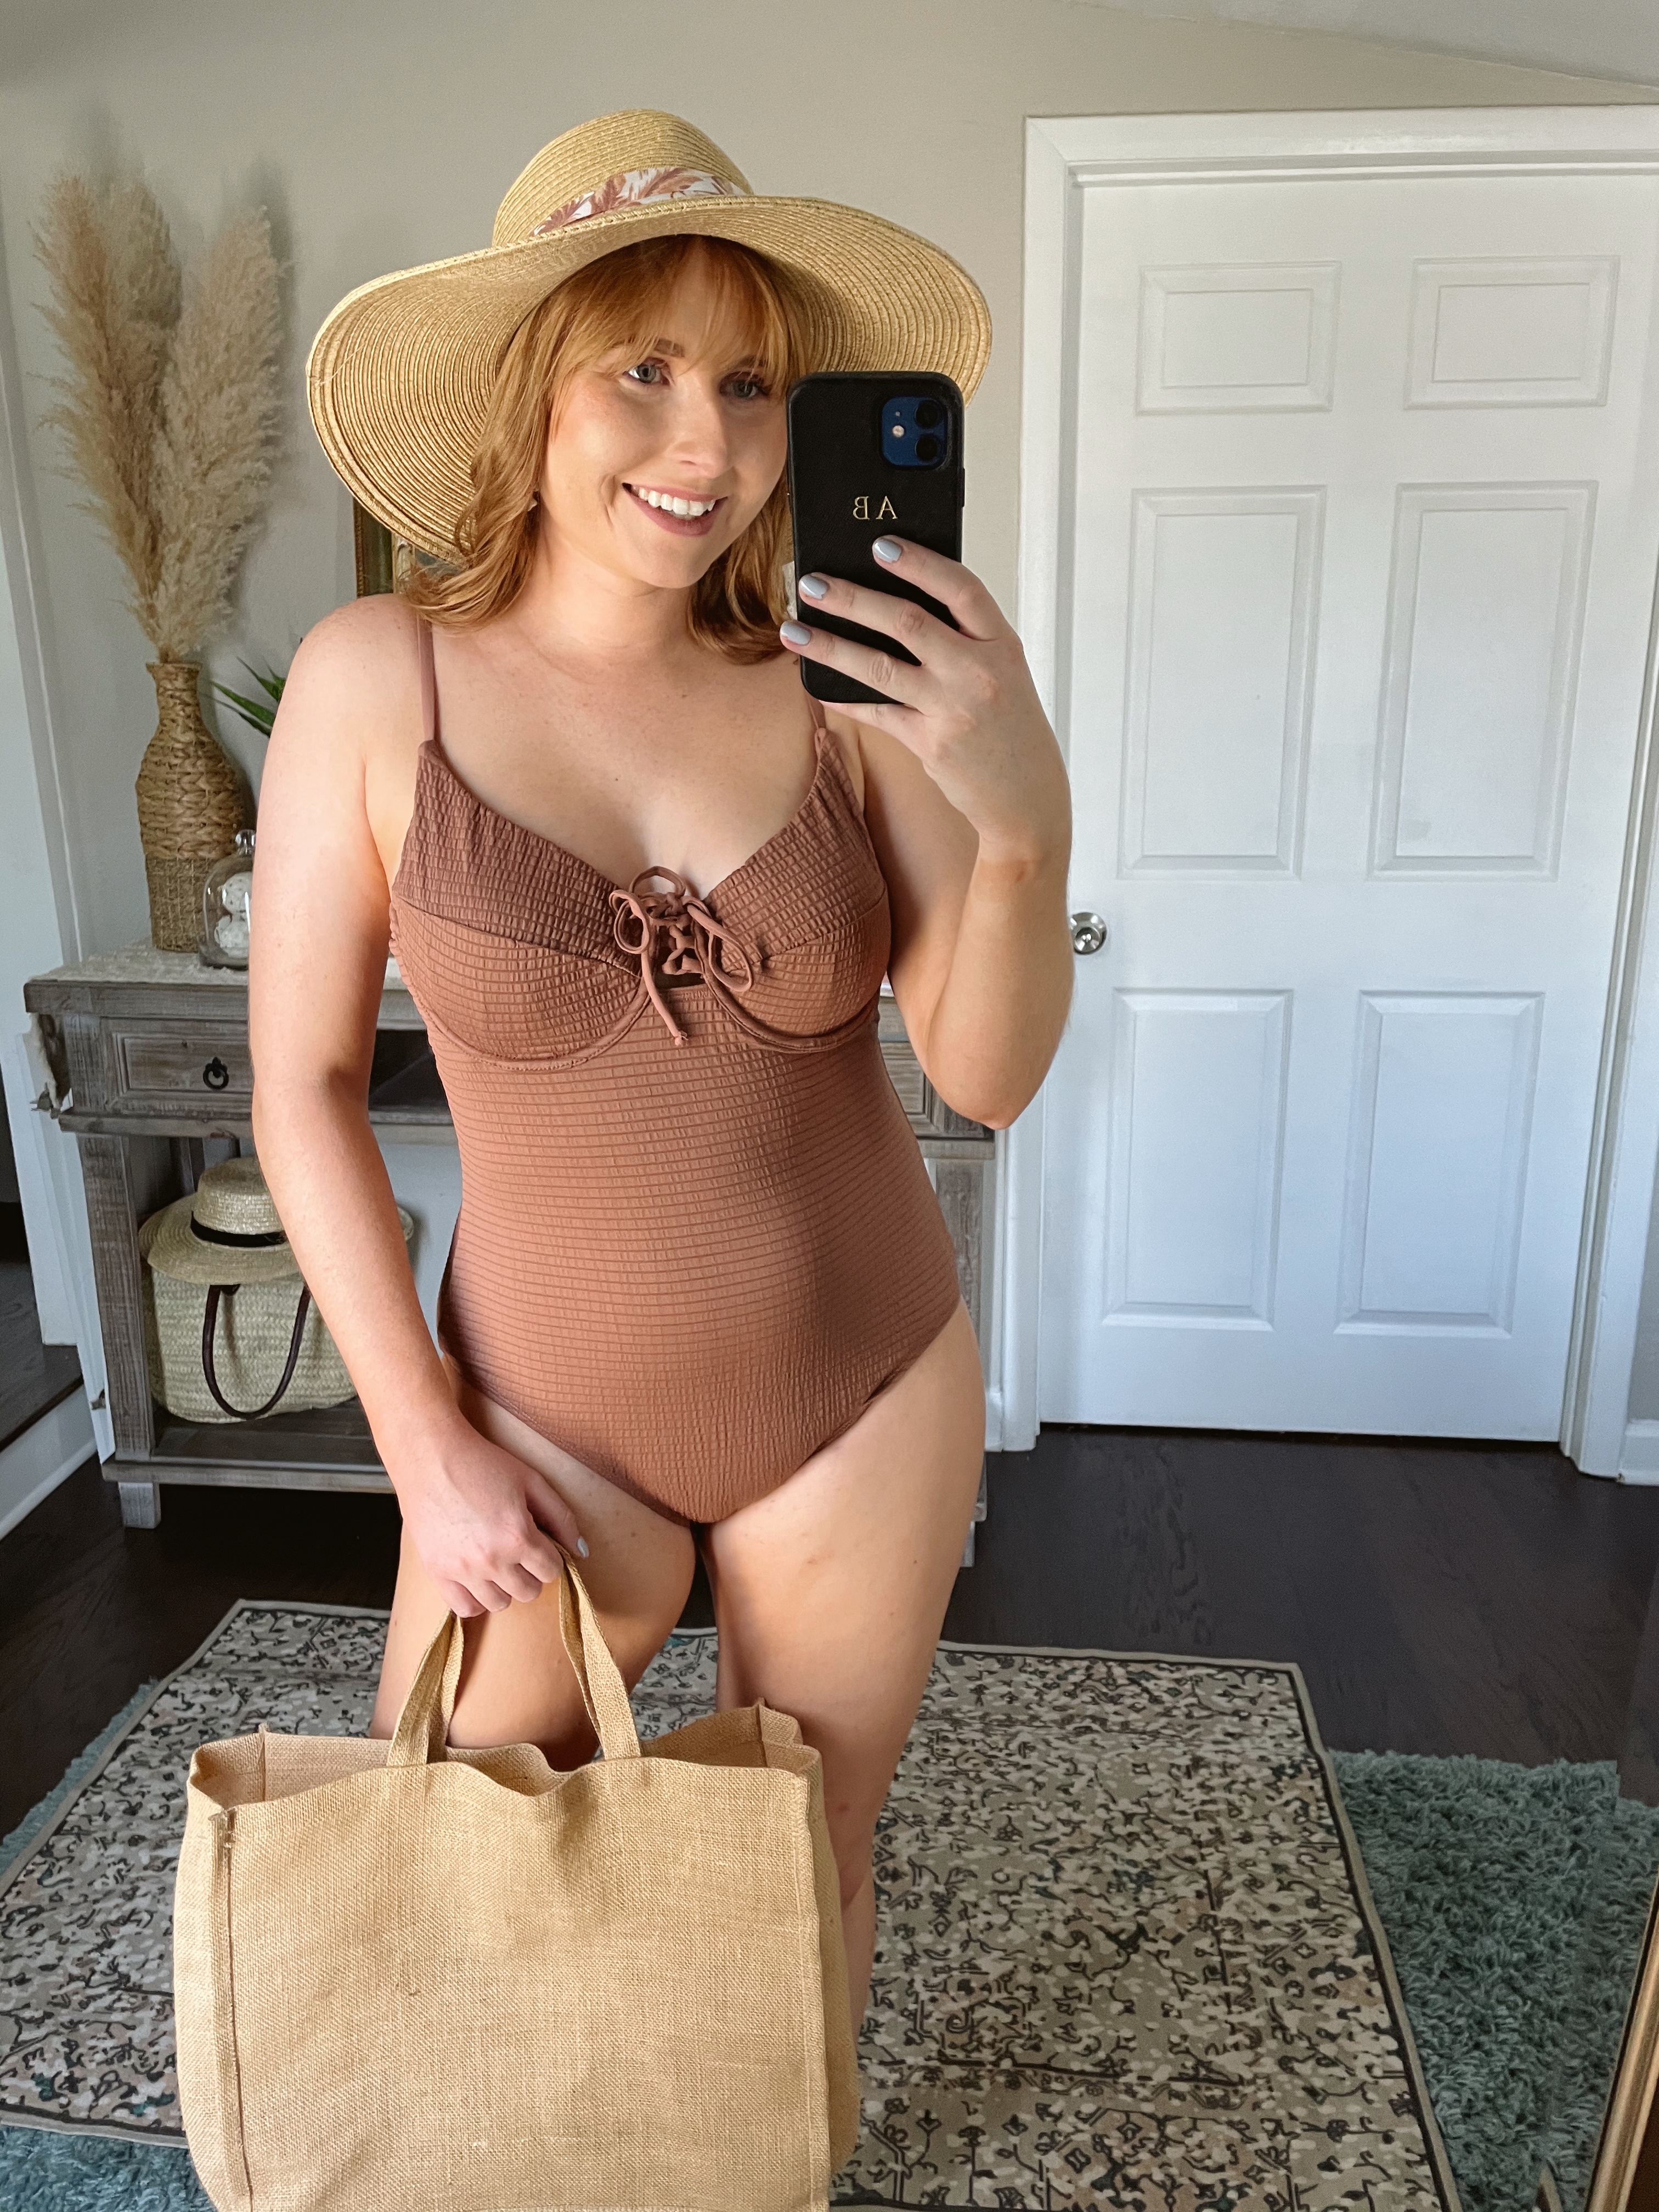 Affordable Walmart Swimsuits 2021 - Affordable by Amanda